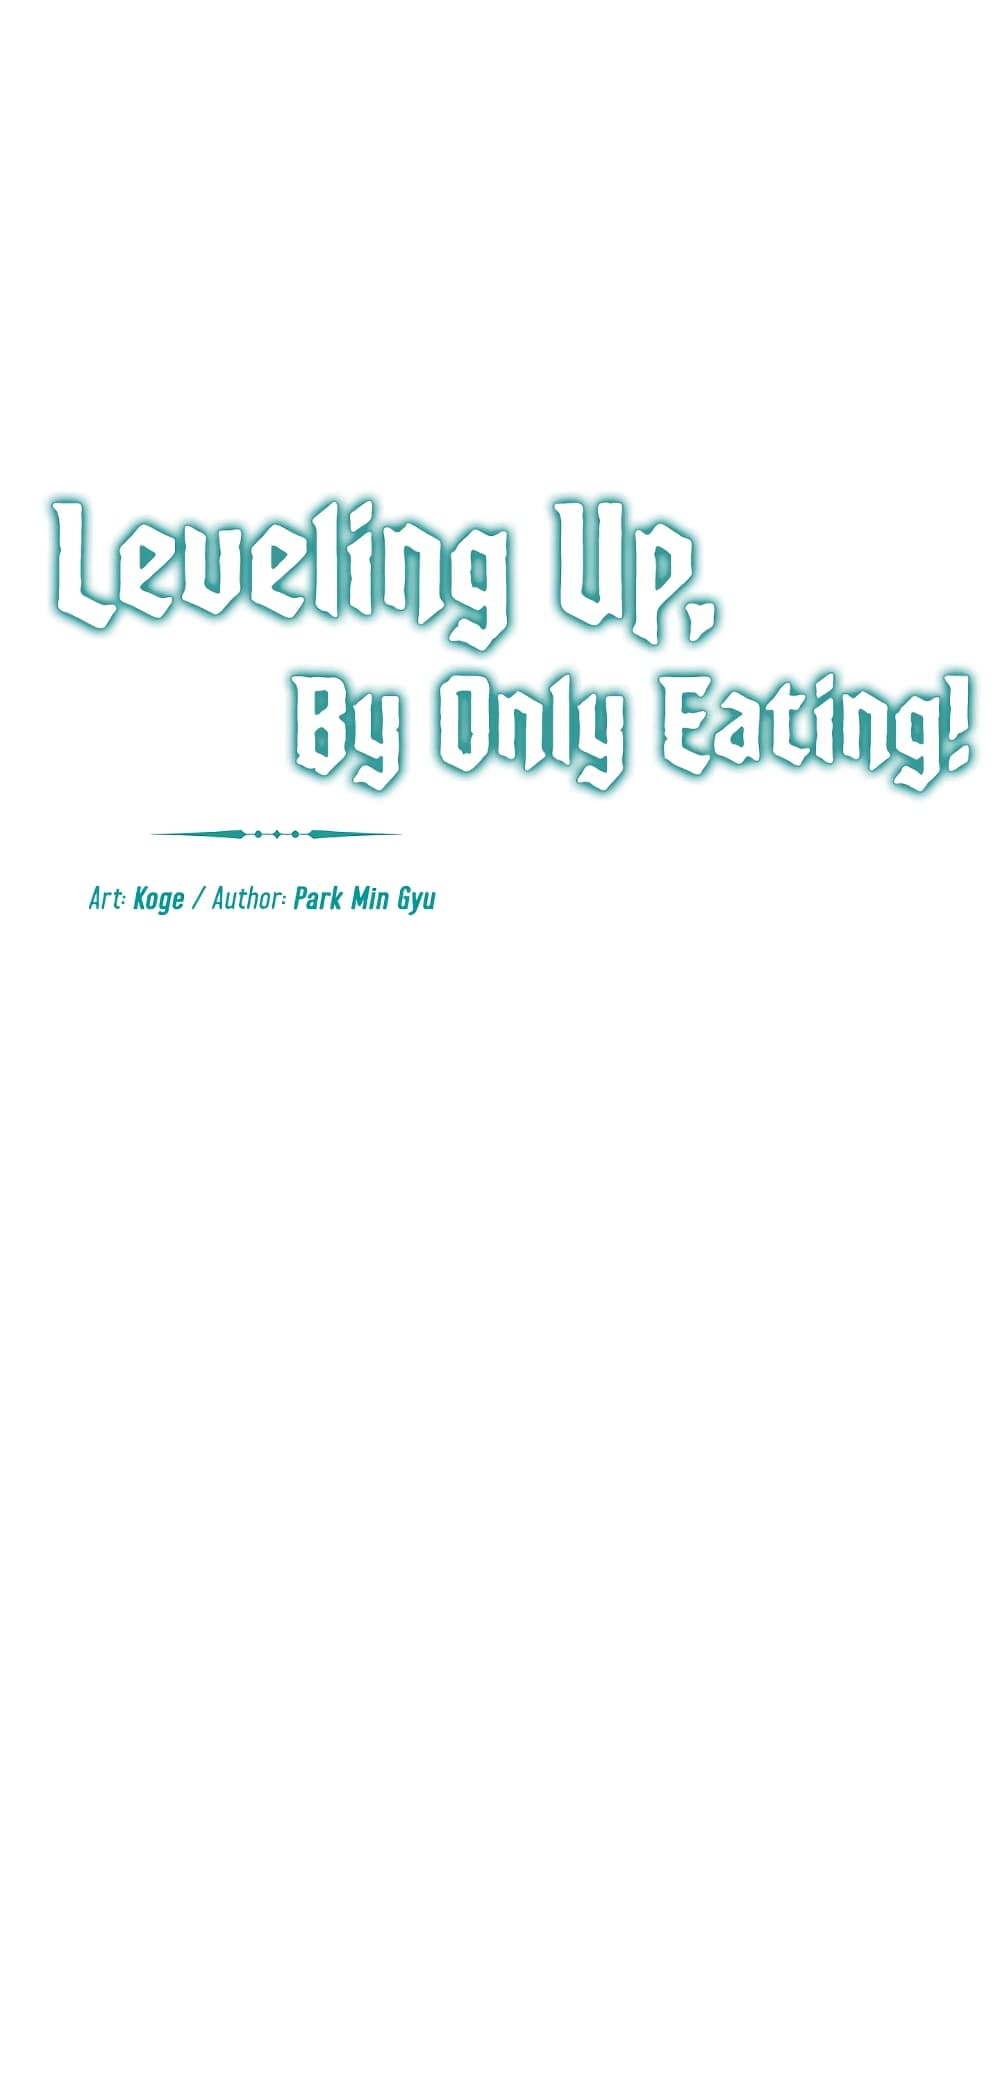 Leveling Up, By Only Eating!13 (7)